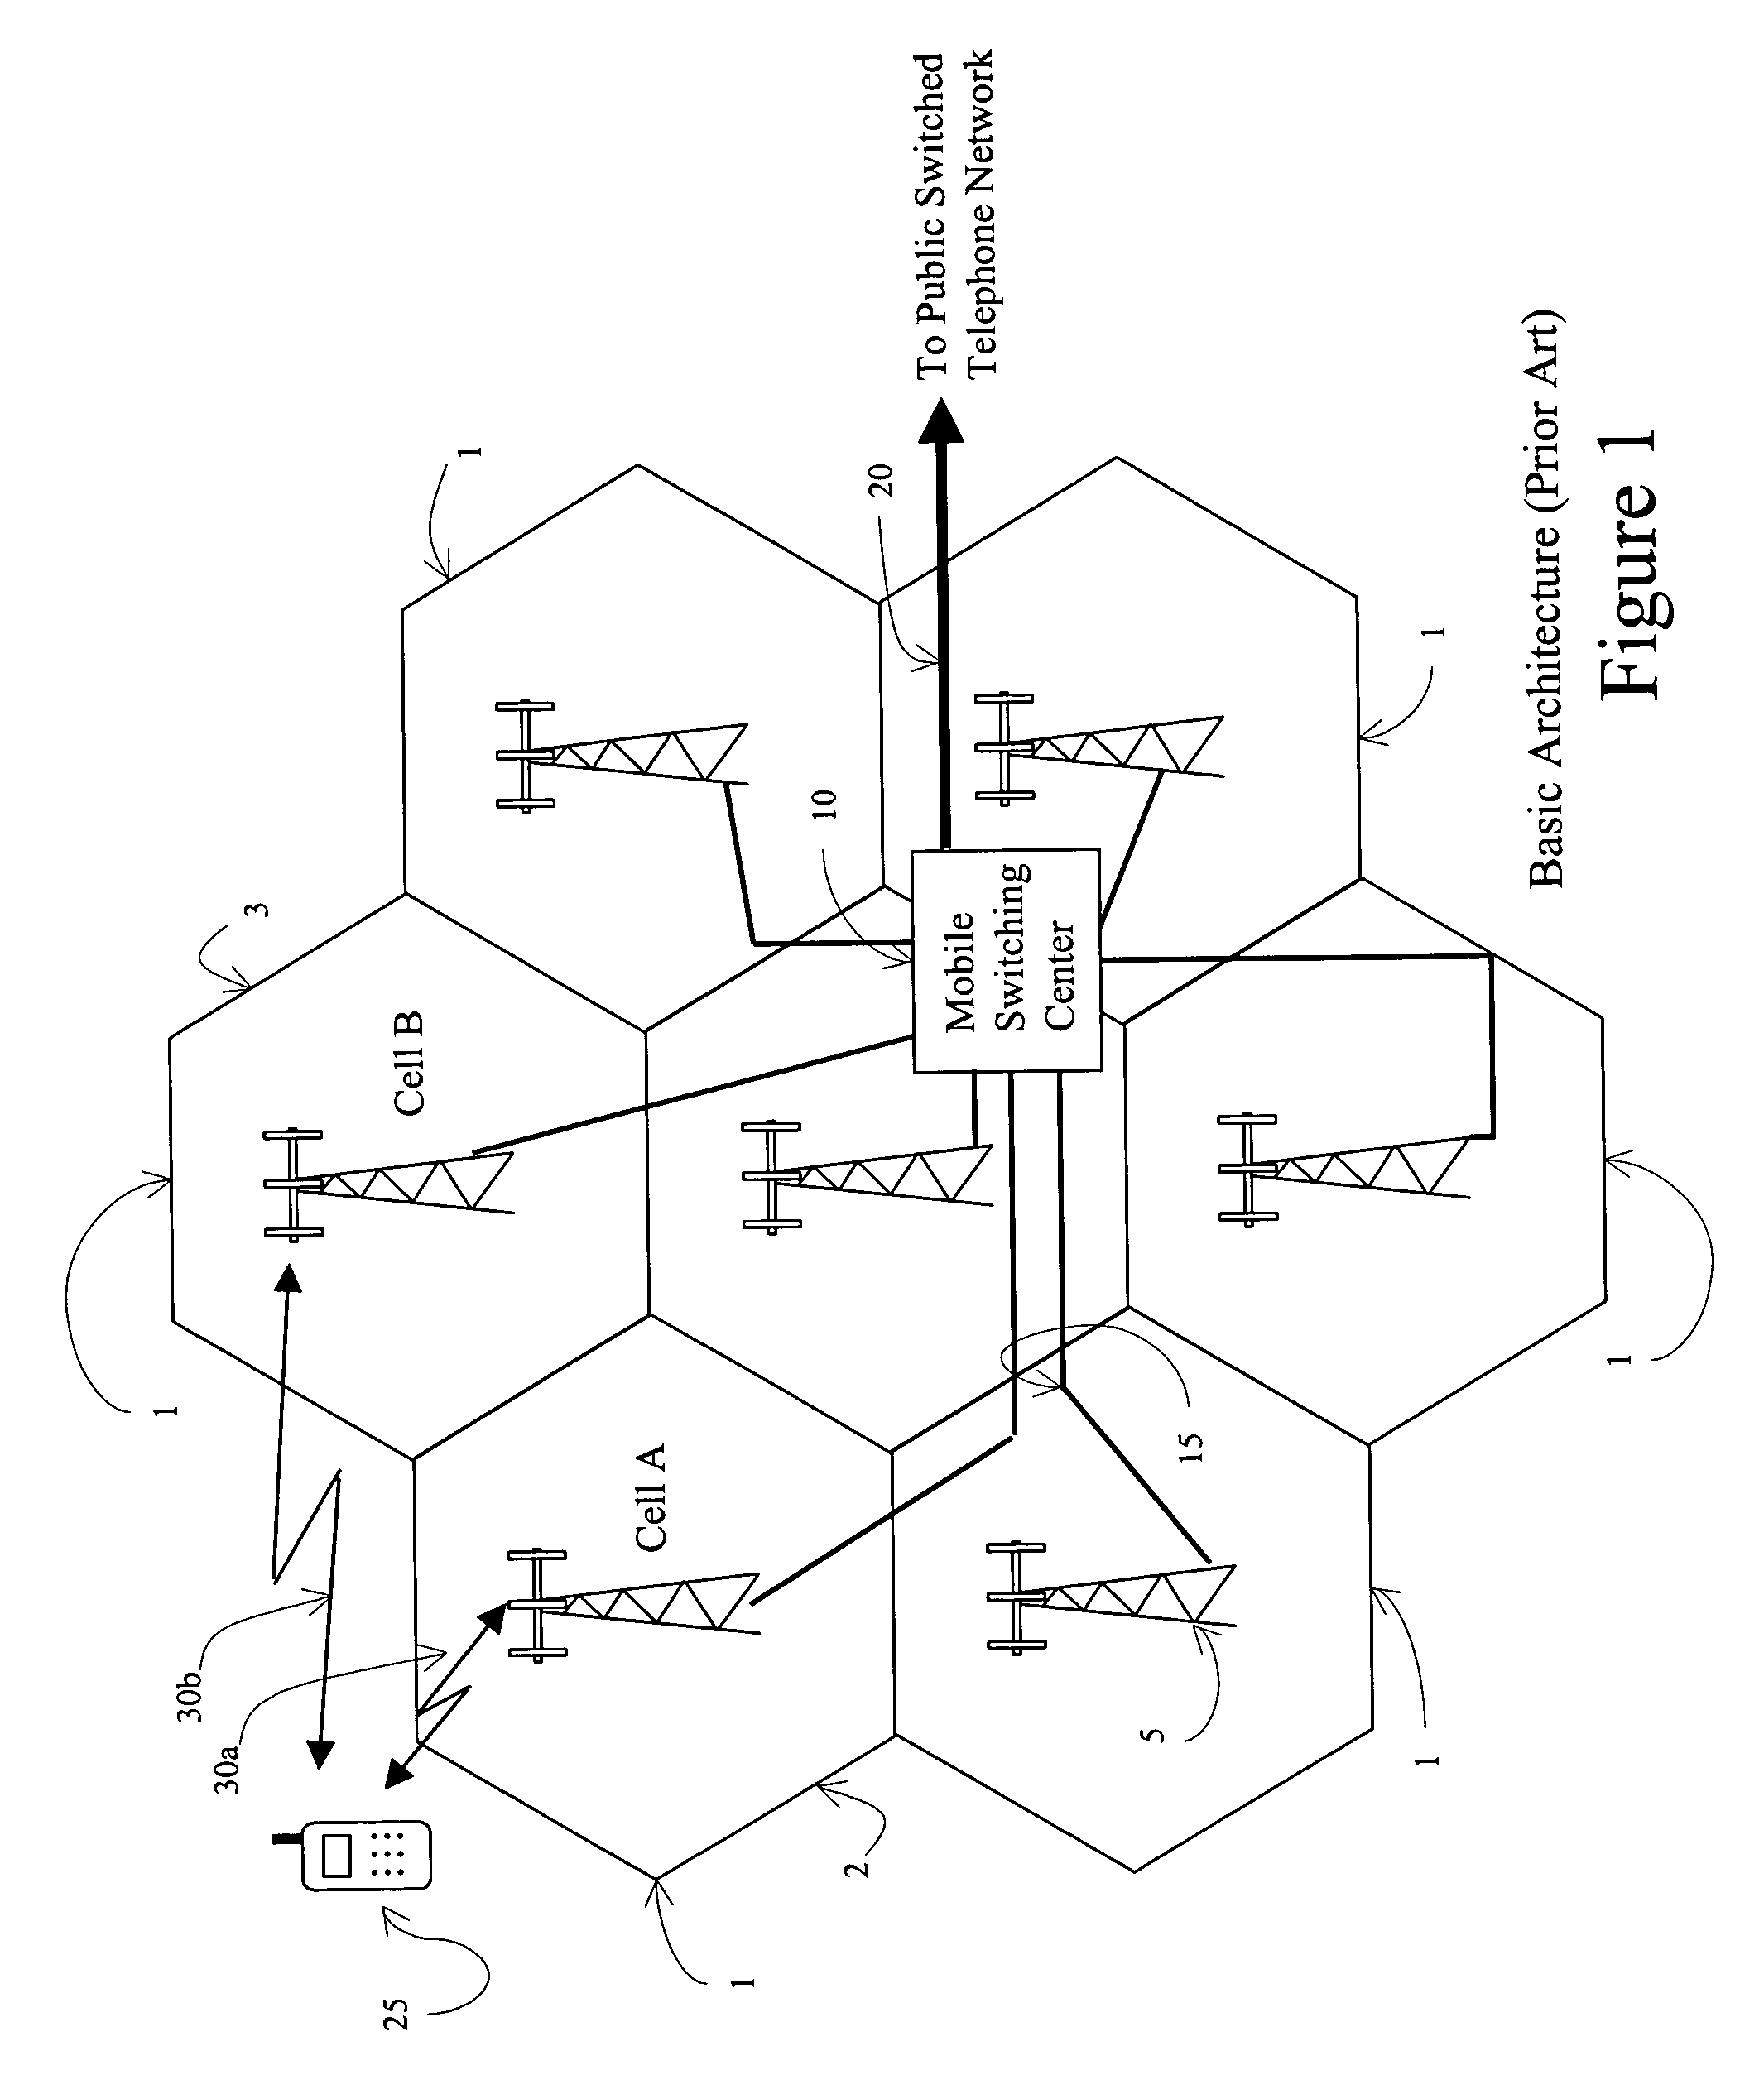 Systems and methods for billing a mobile wireless subscriber for fixed location service